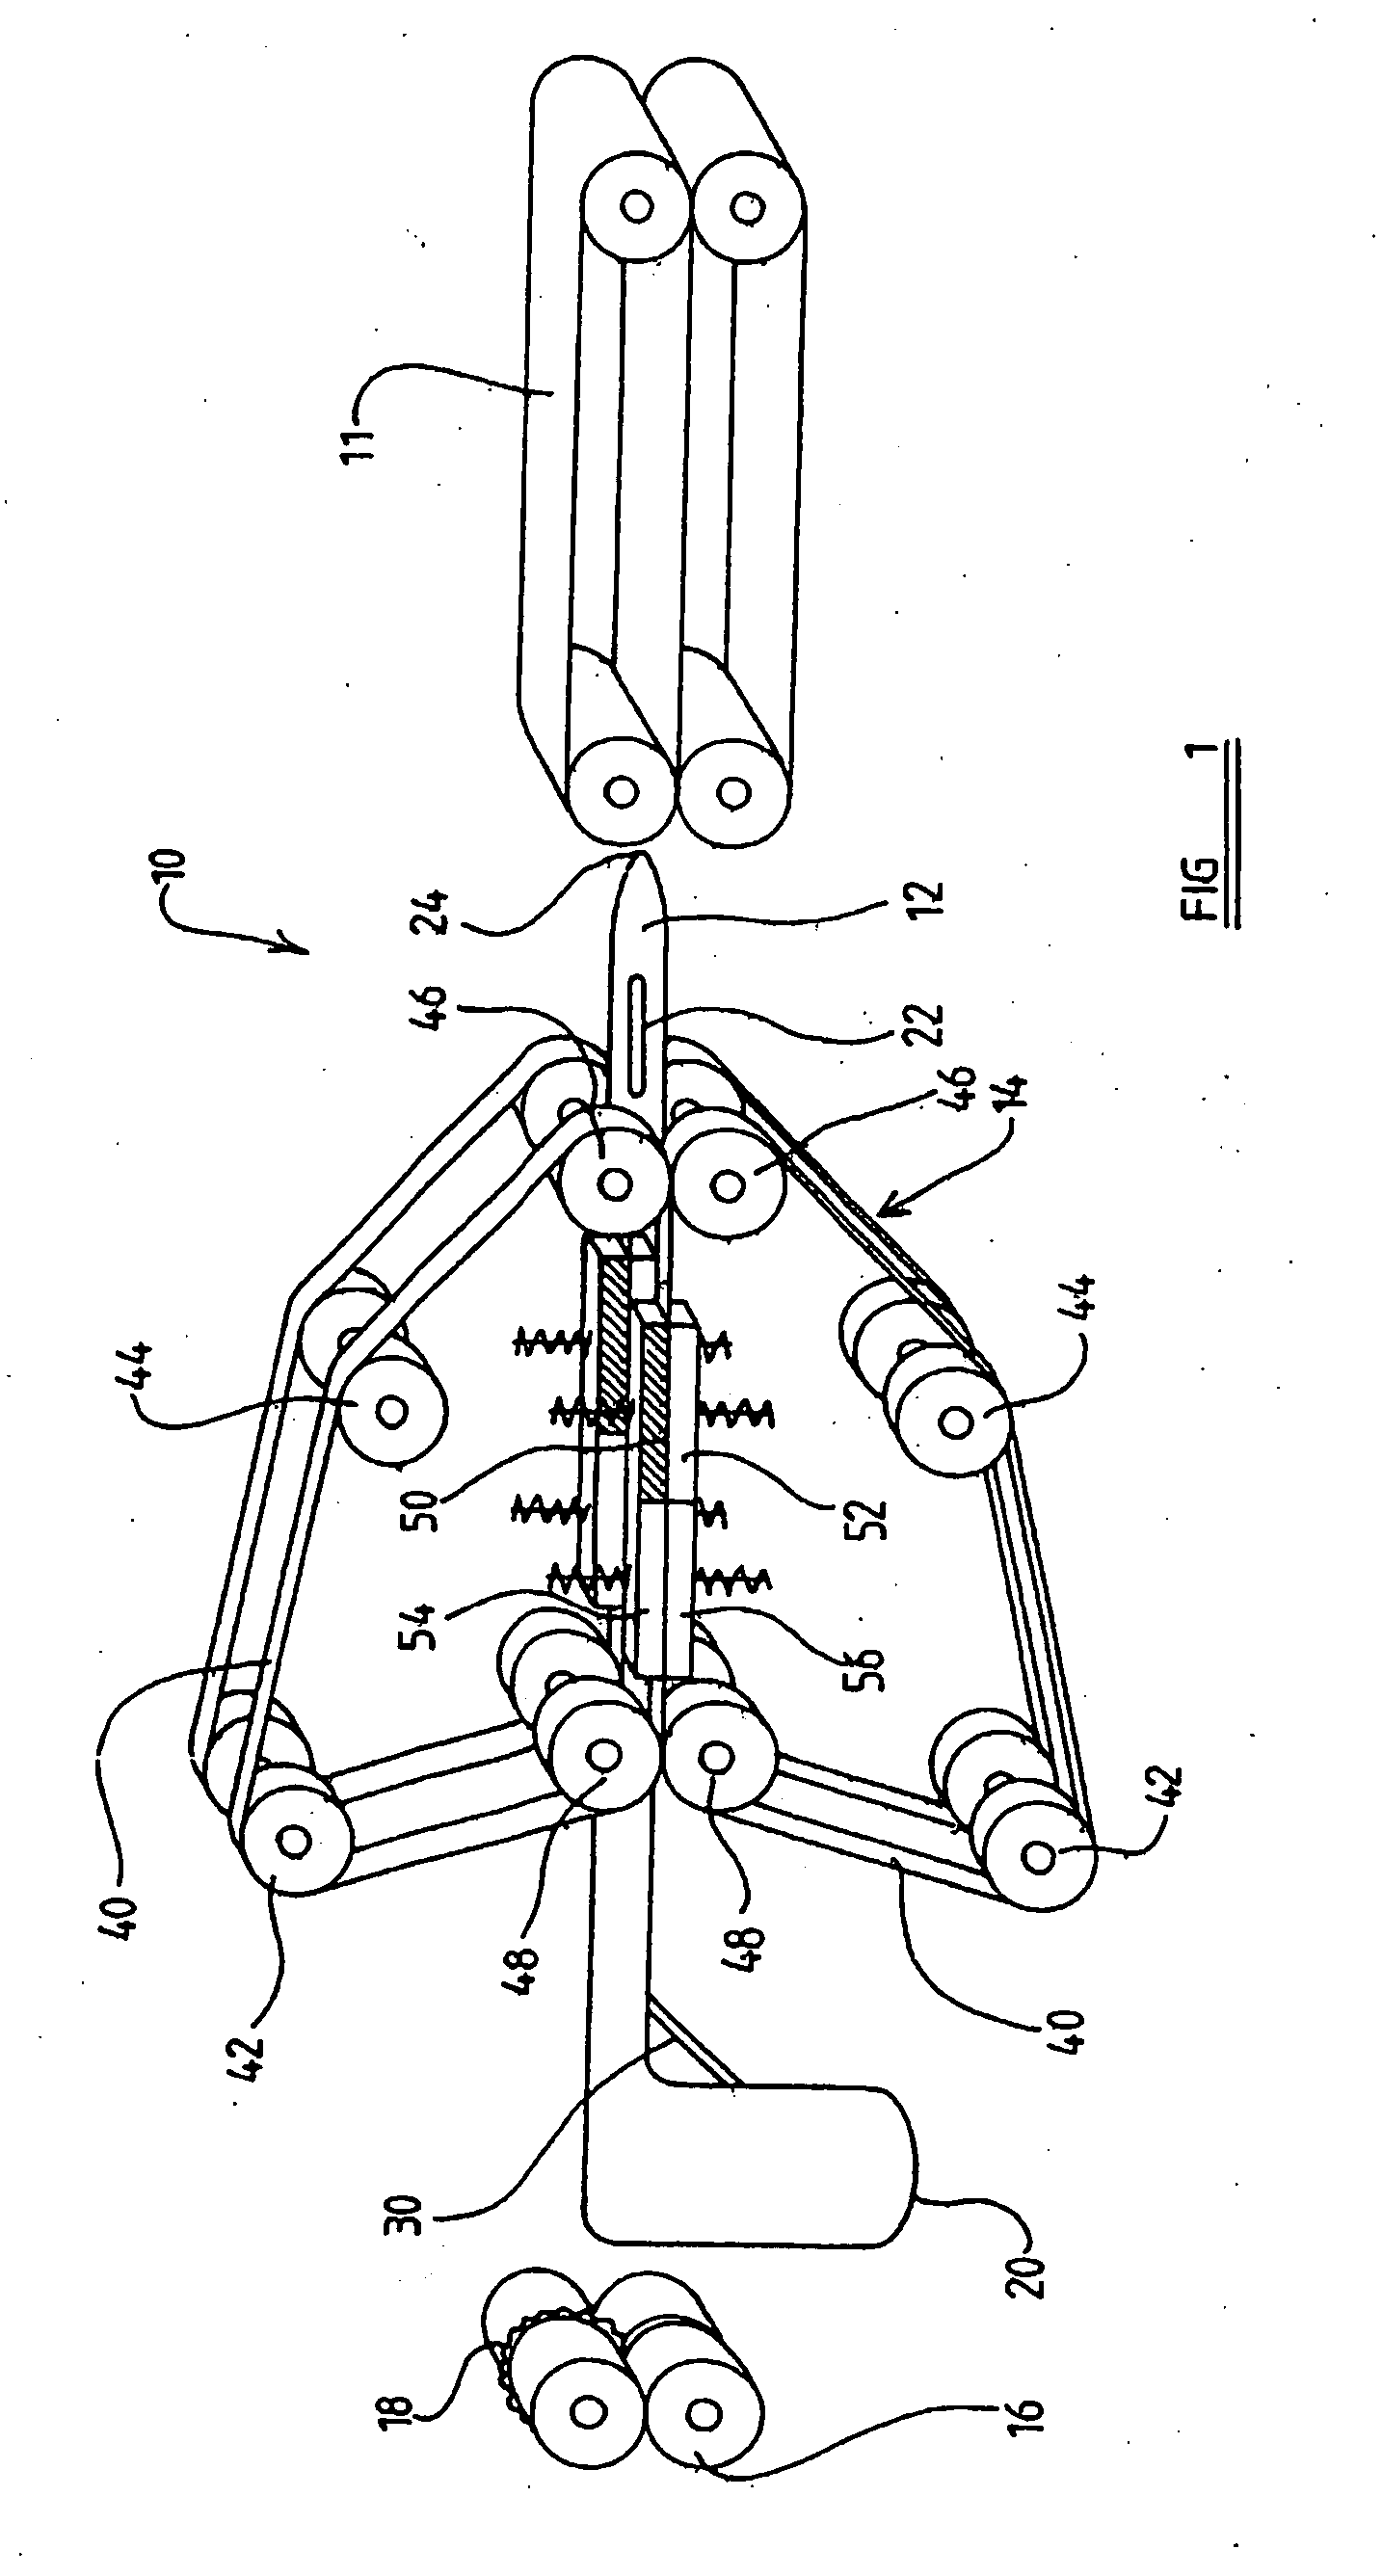 Machine and methods for the manufacture of air-filled cushions